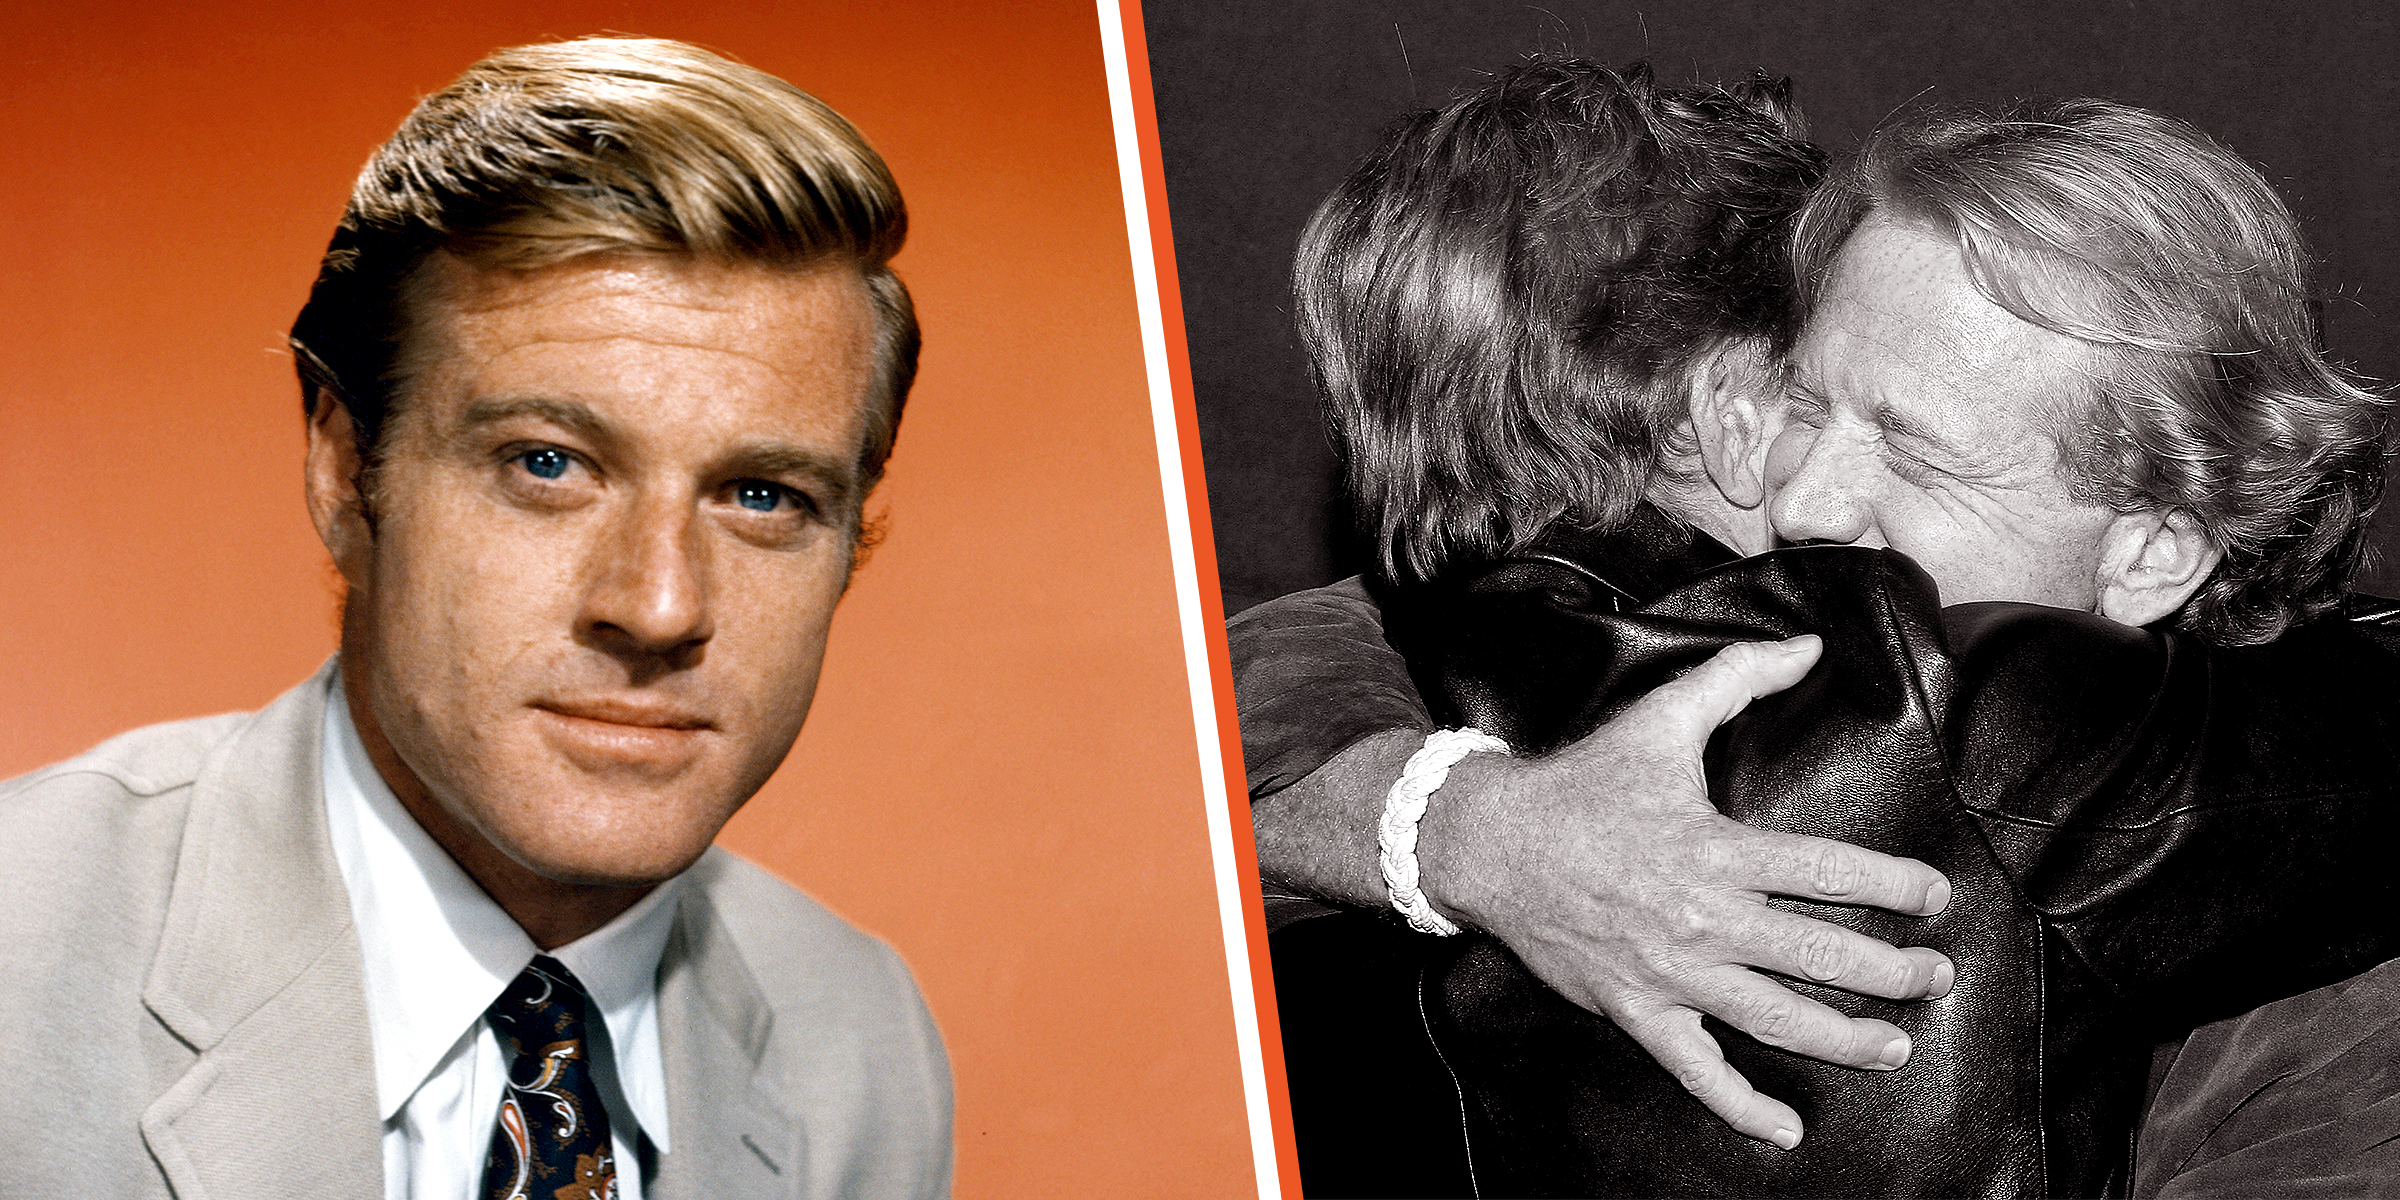 Rovert Redford | Robert Redford and James Redford | Source: Getty Images